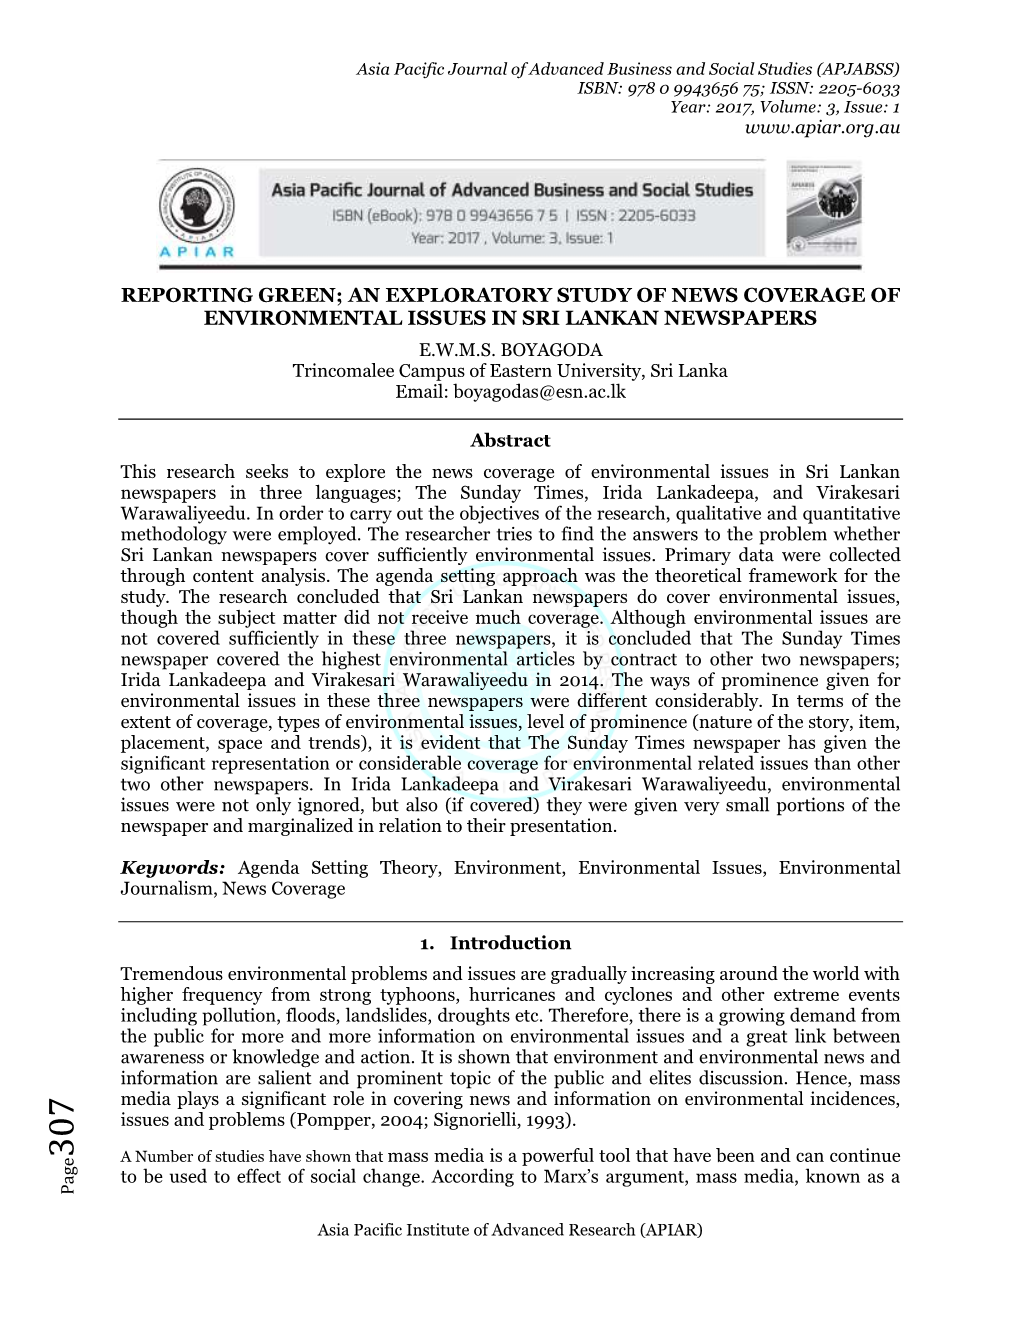 An Exploratory Study of News Coverage of Environmental Issues in Sri Lankan Newspapers E.W.M.S